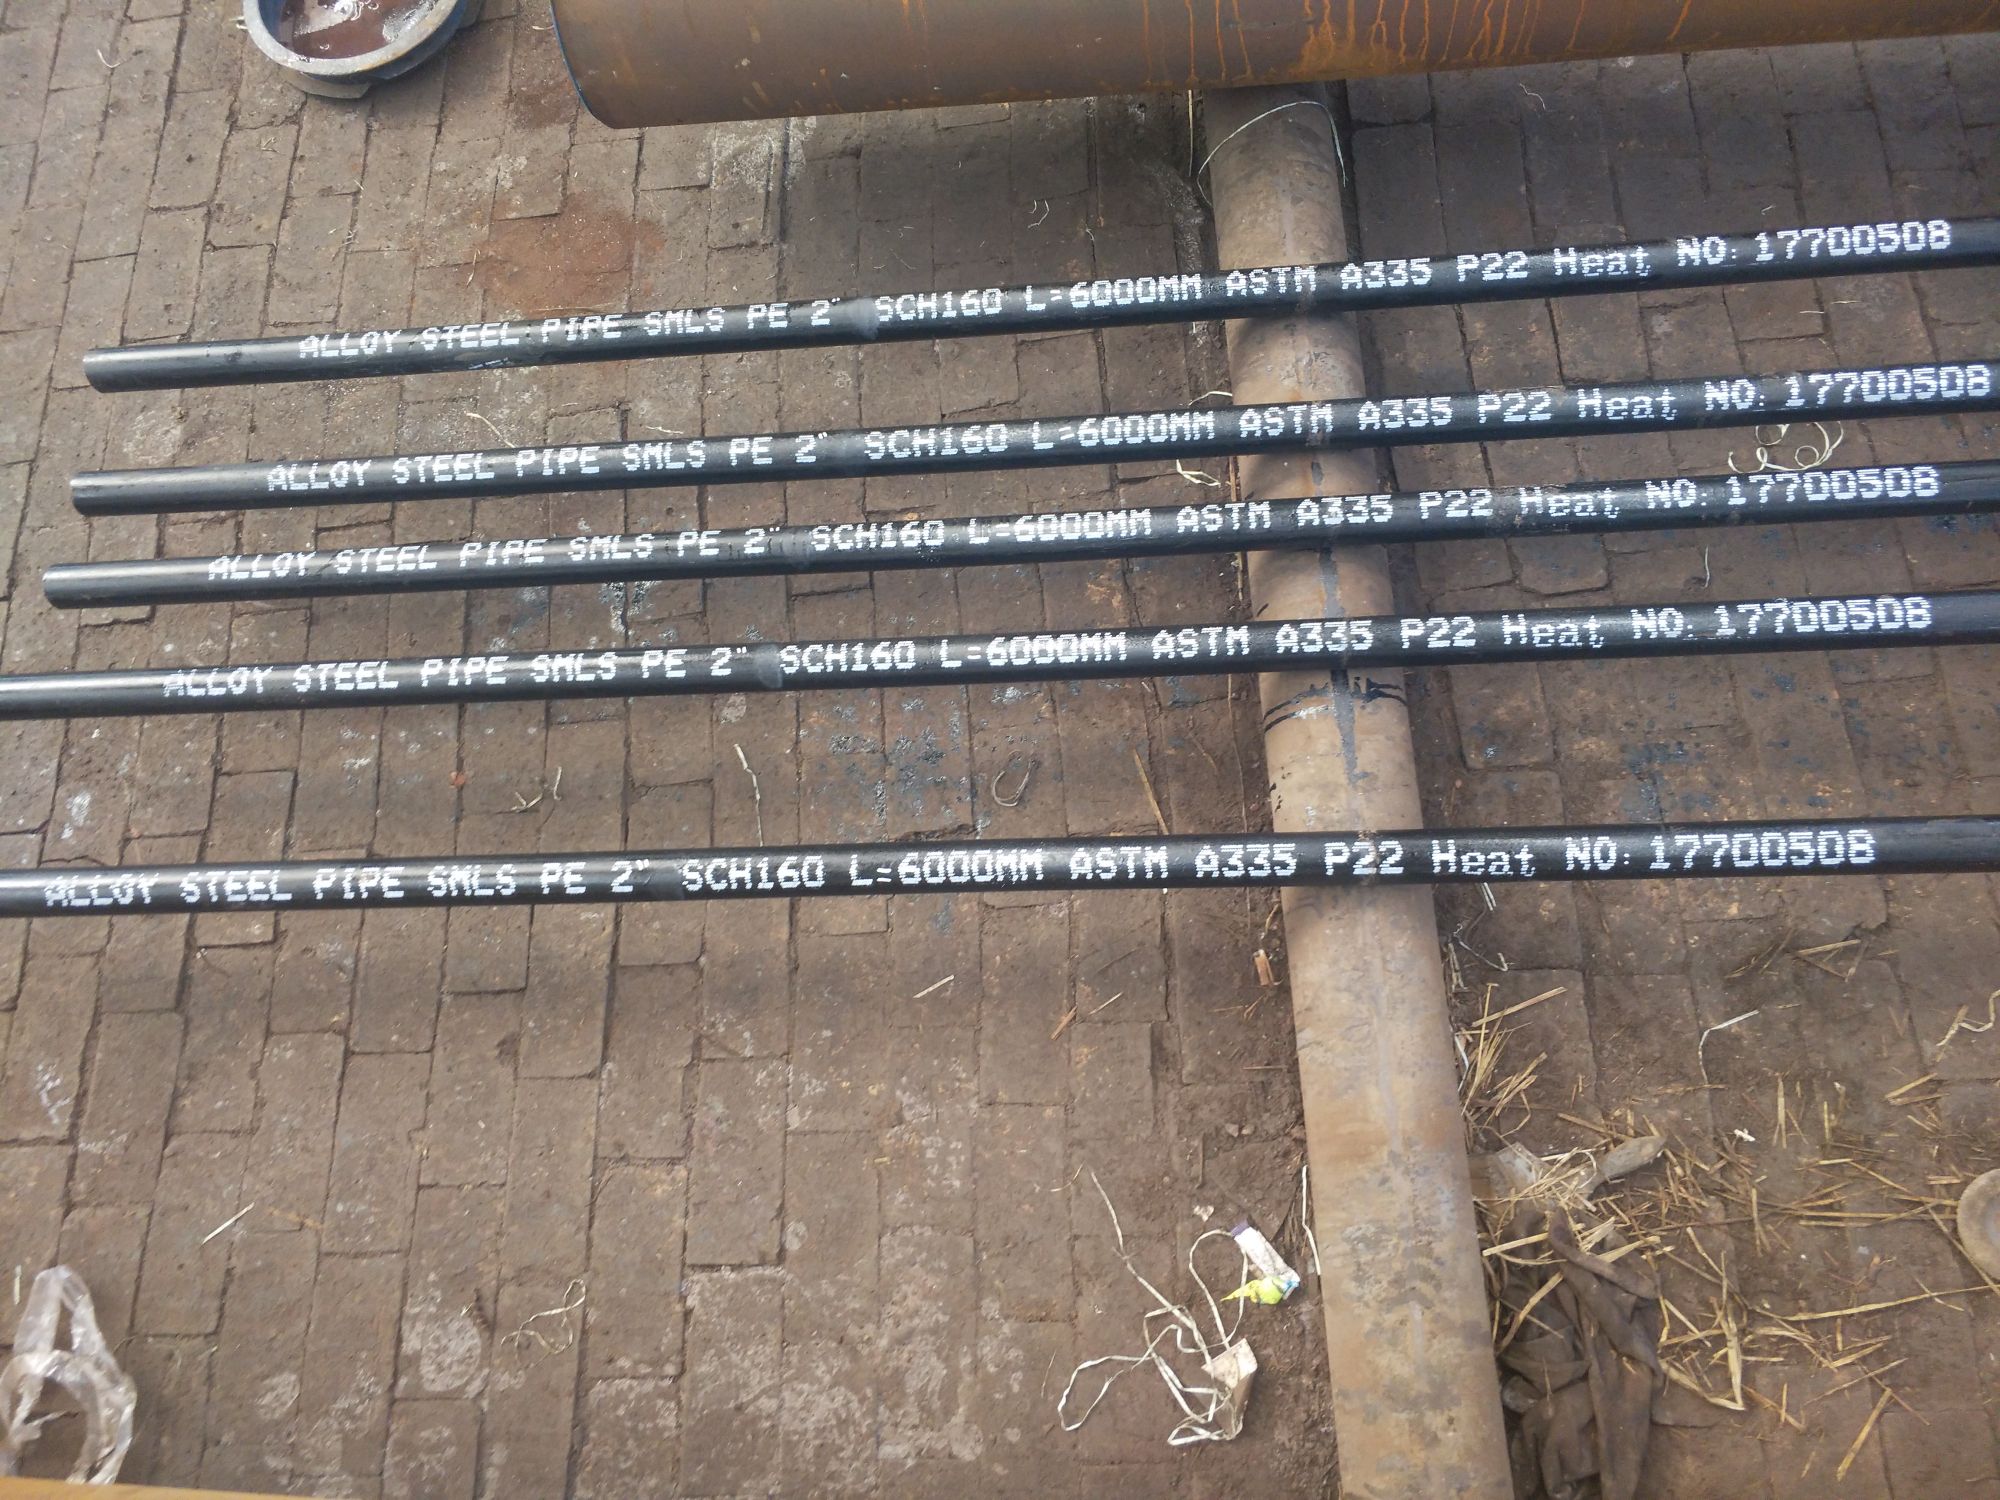 ASTM A335 P22 steel pipe 2